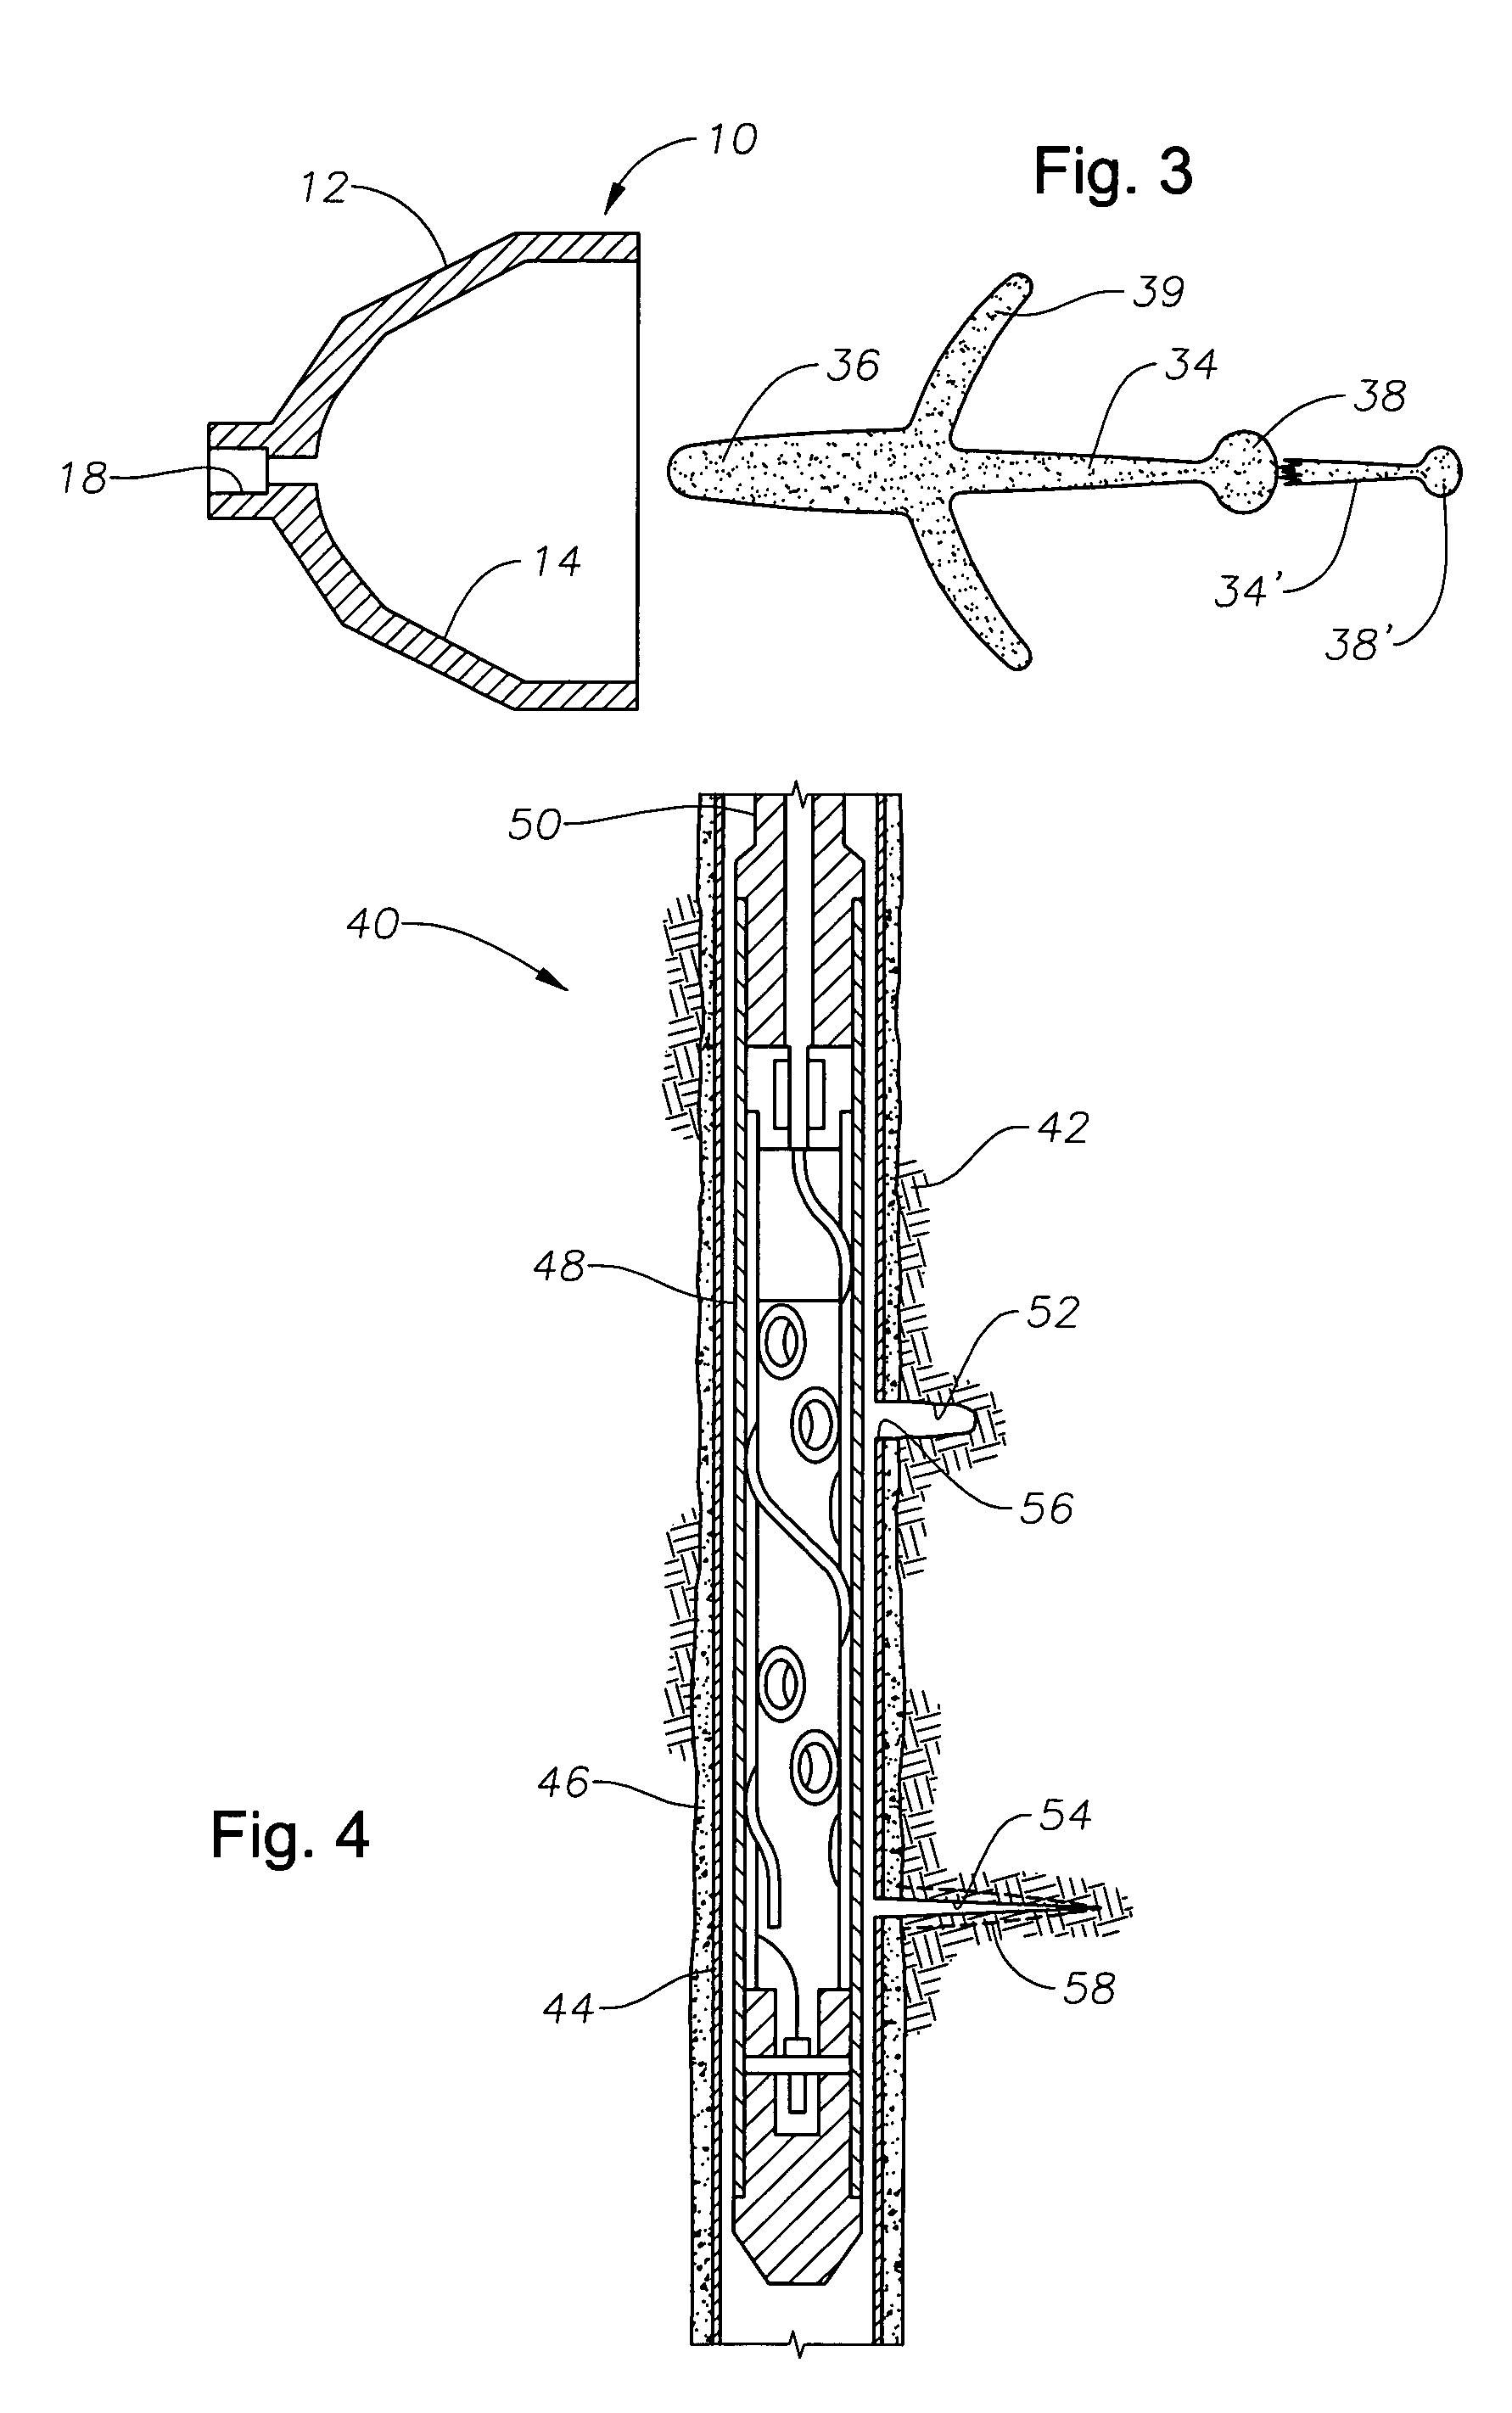 Apparatus and method for penetrating oilbearing sandy formations, reducing skin damage and reducing hydrocarbon viscosity